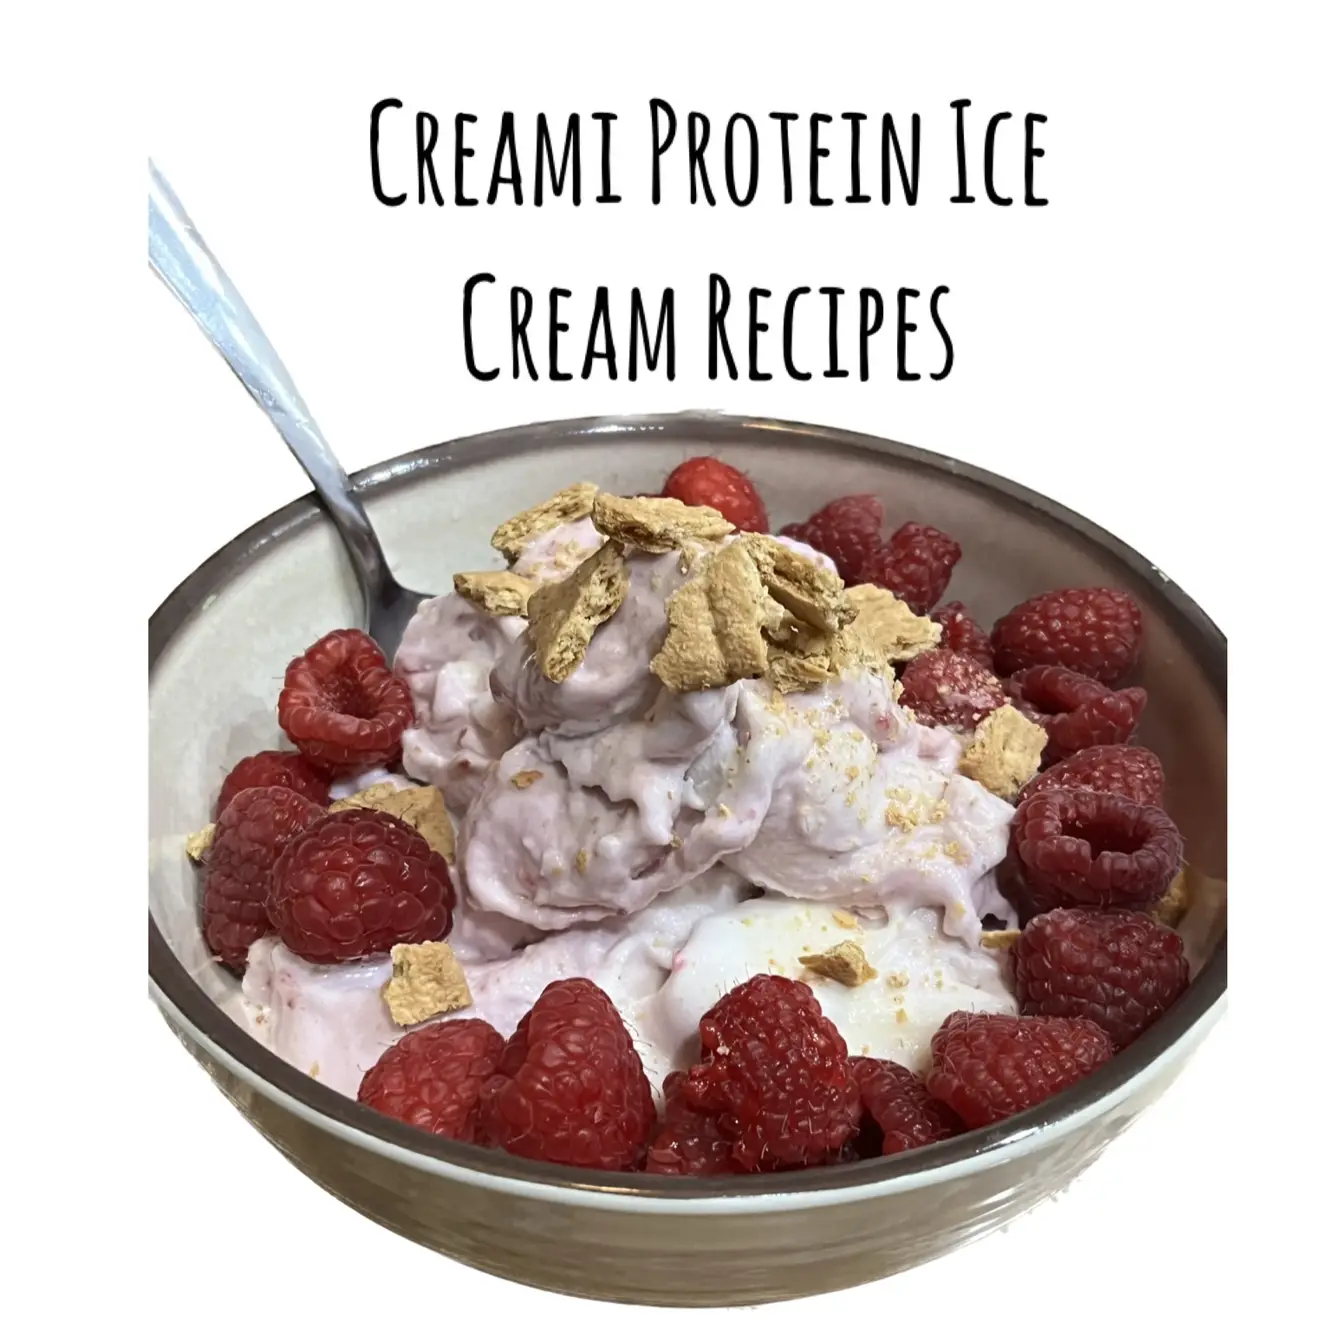 Ninja Creami Protein Smoothie Bowl Recipe: Easy and Yummy - Fit Healthy  Macros